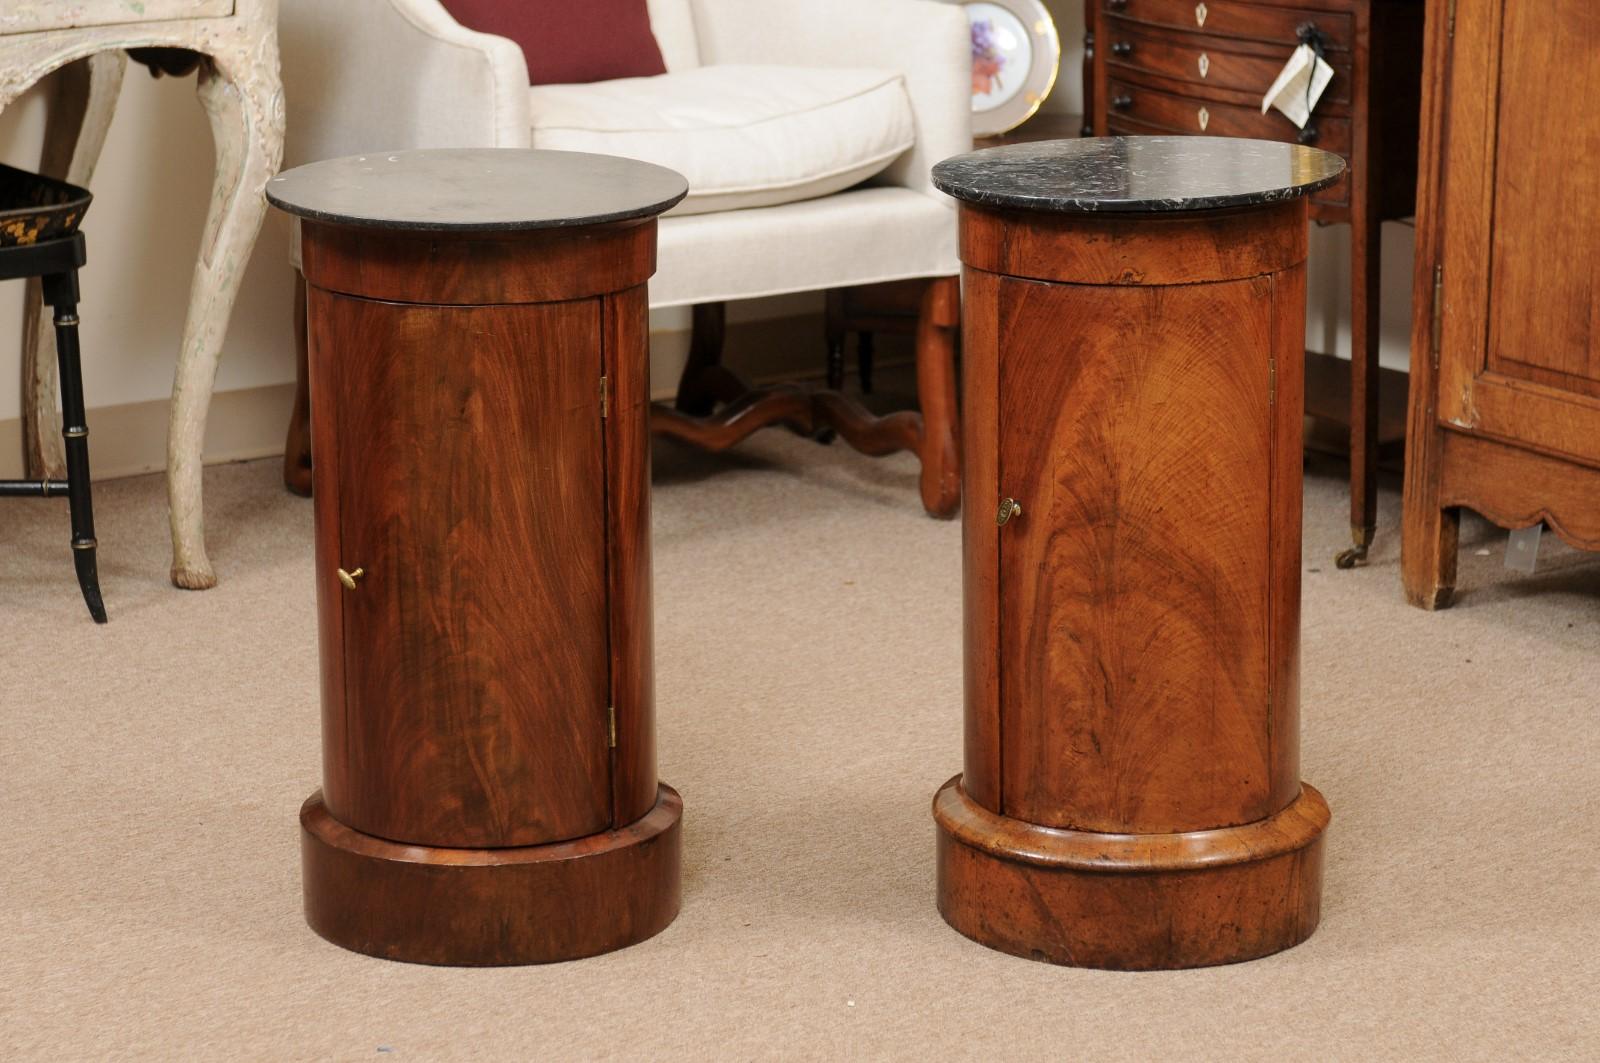 Matched Pair of Cylindrical Cabinets in Mahogany with Black Marble Tops 10